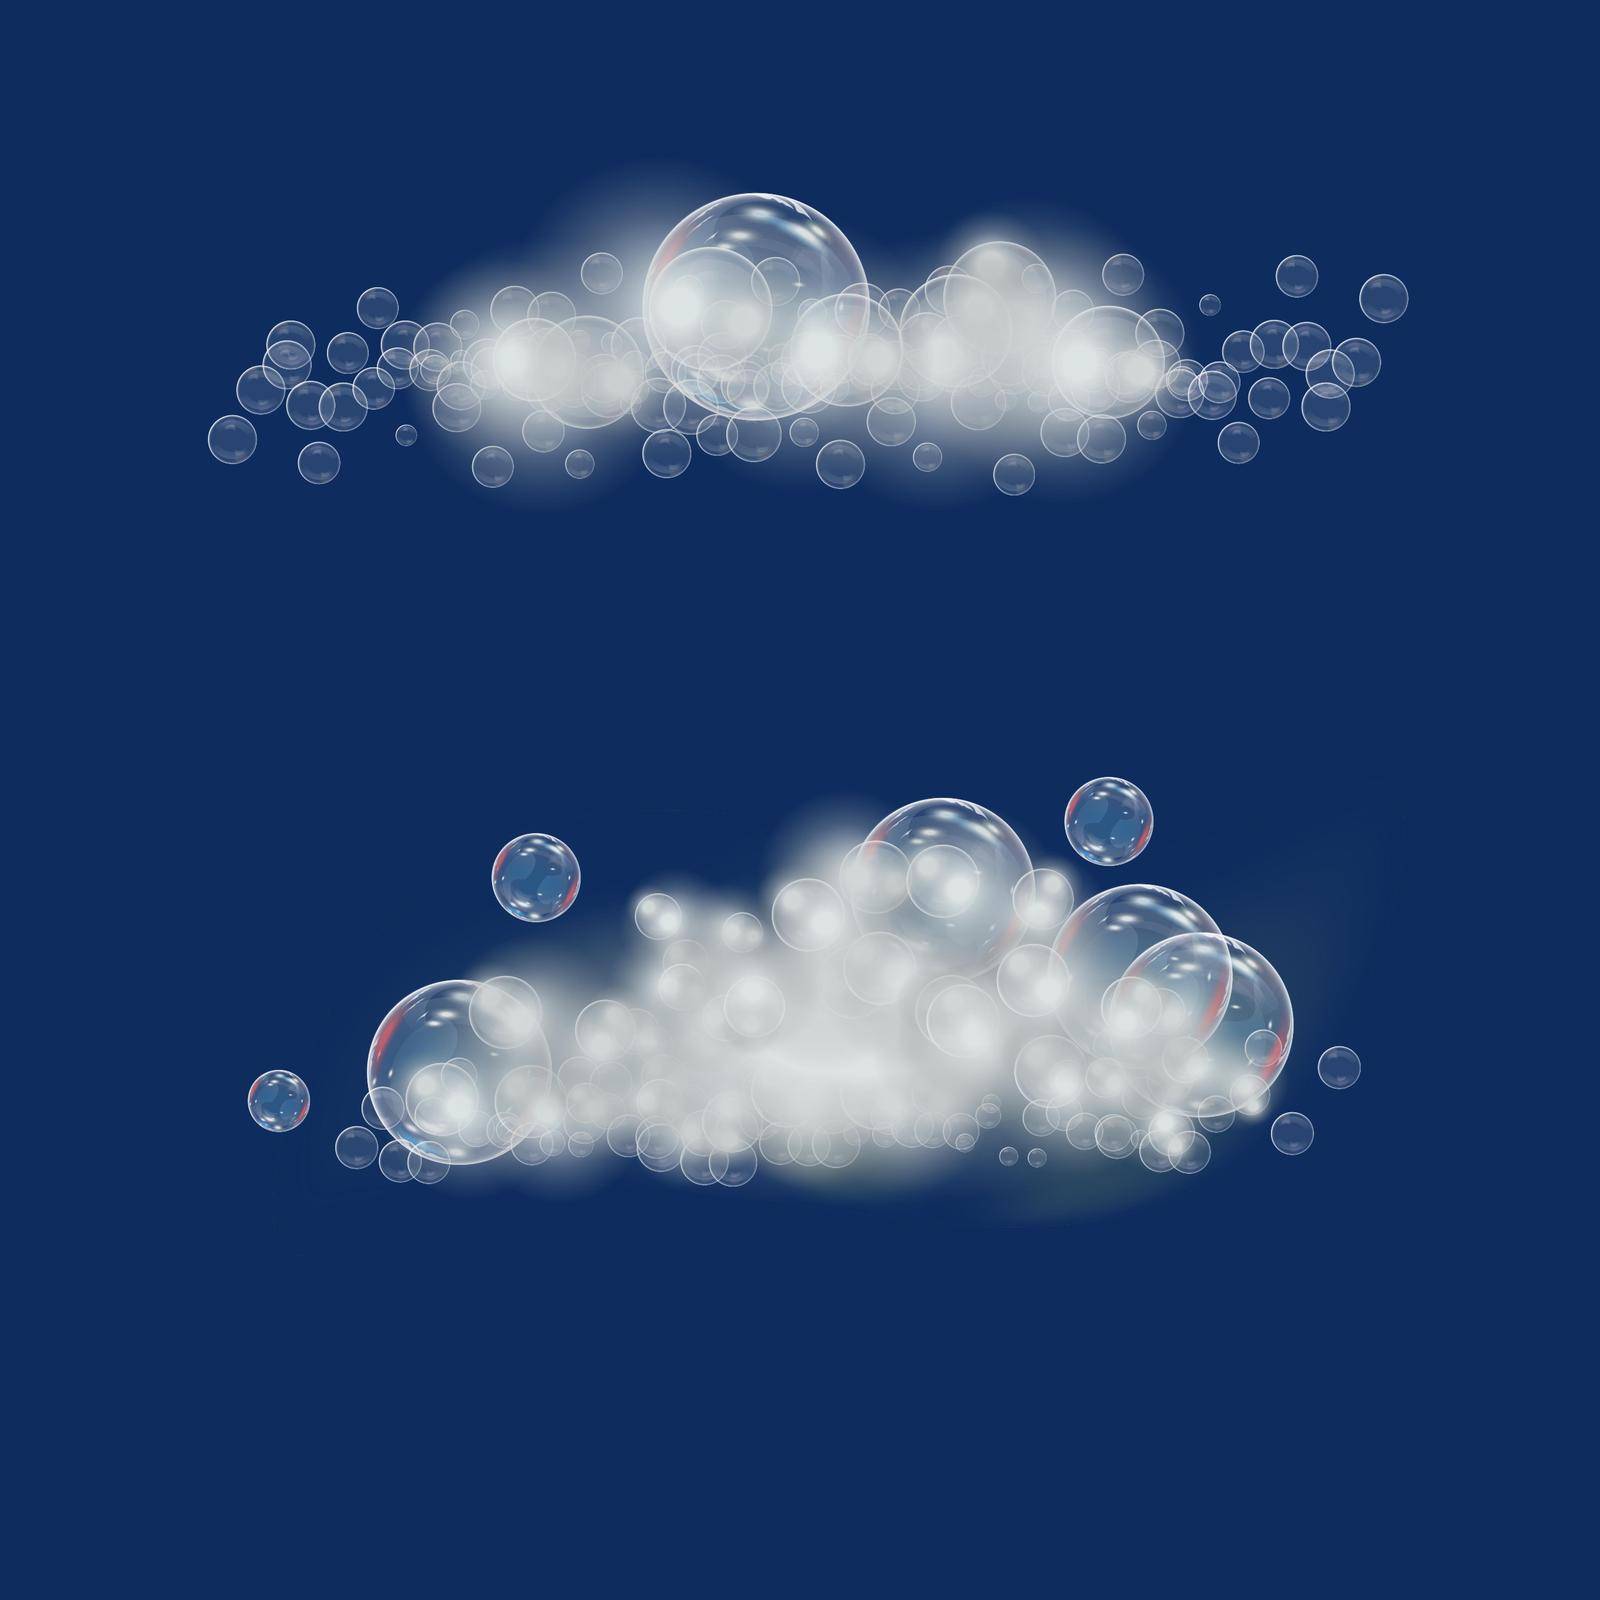 foam with soap in the form of clouds on a blue background. Shampoo and foam vector illustration